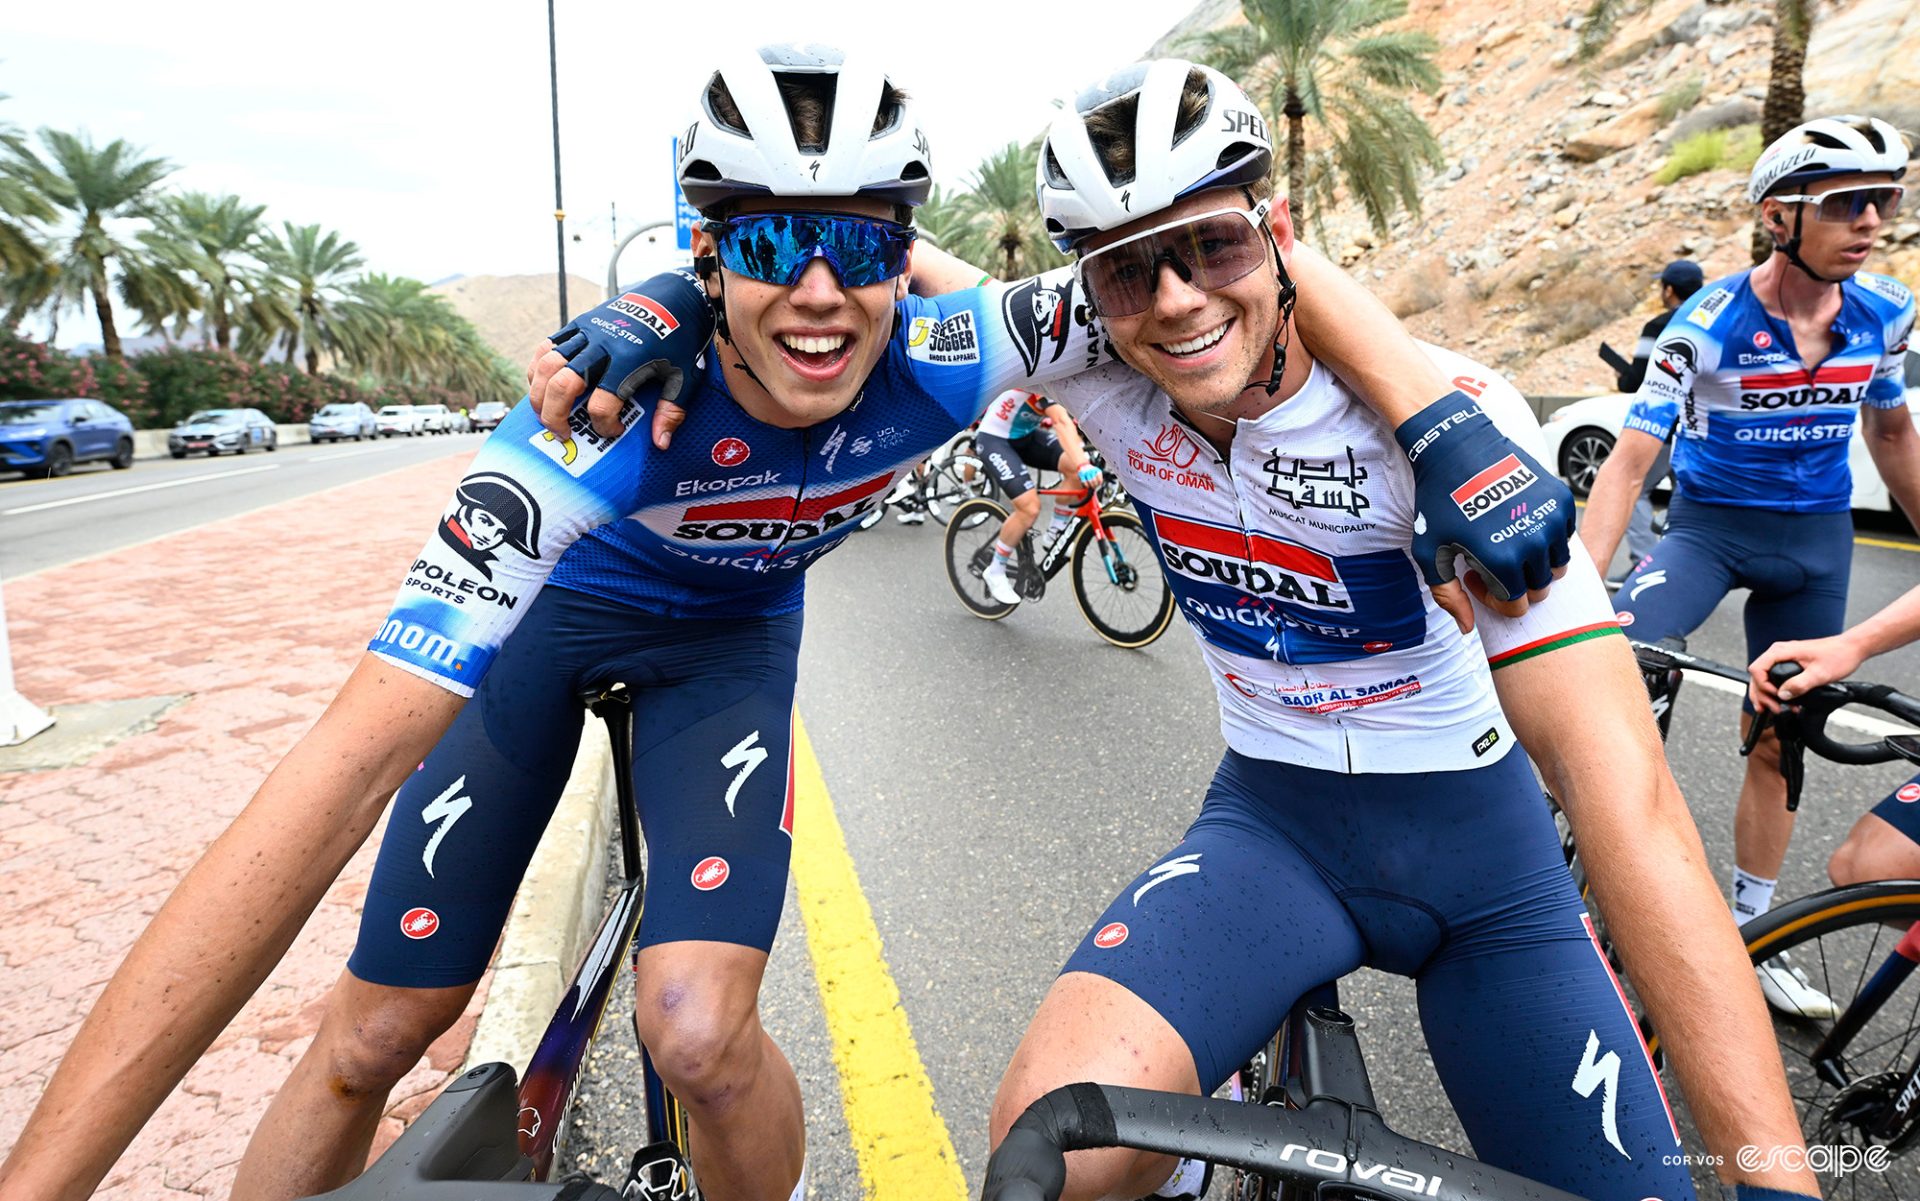 Paul Magnier and Luke Lamperti celebrate going 1-2 on Tour of Oman stage 3.